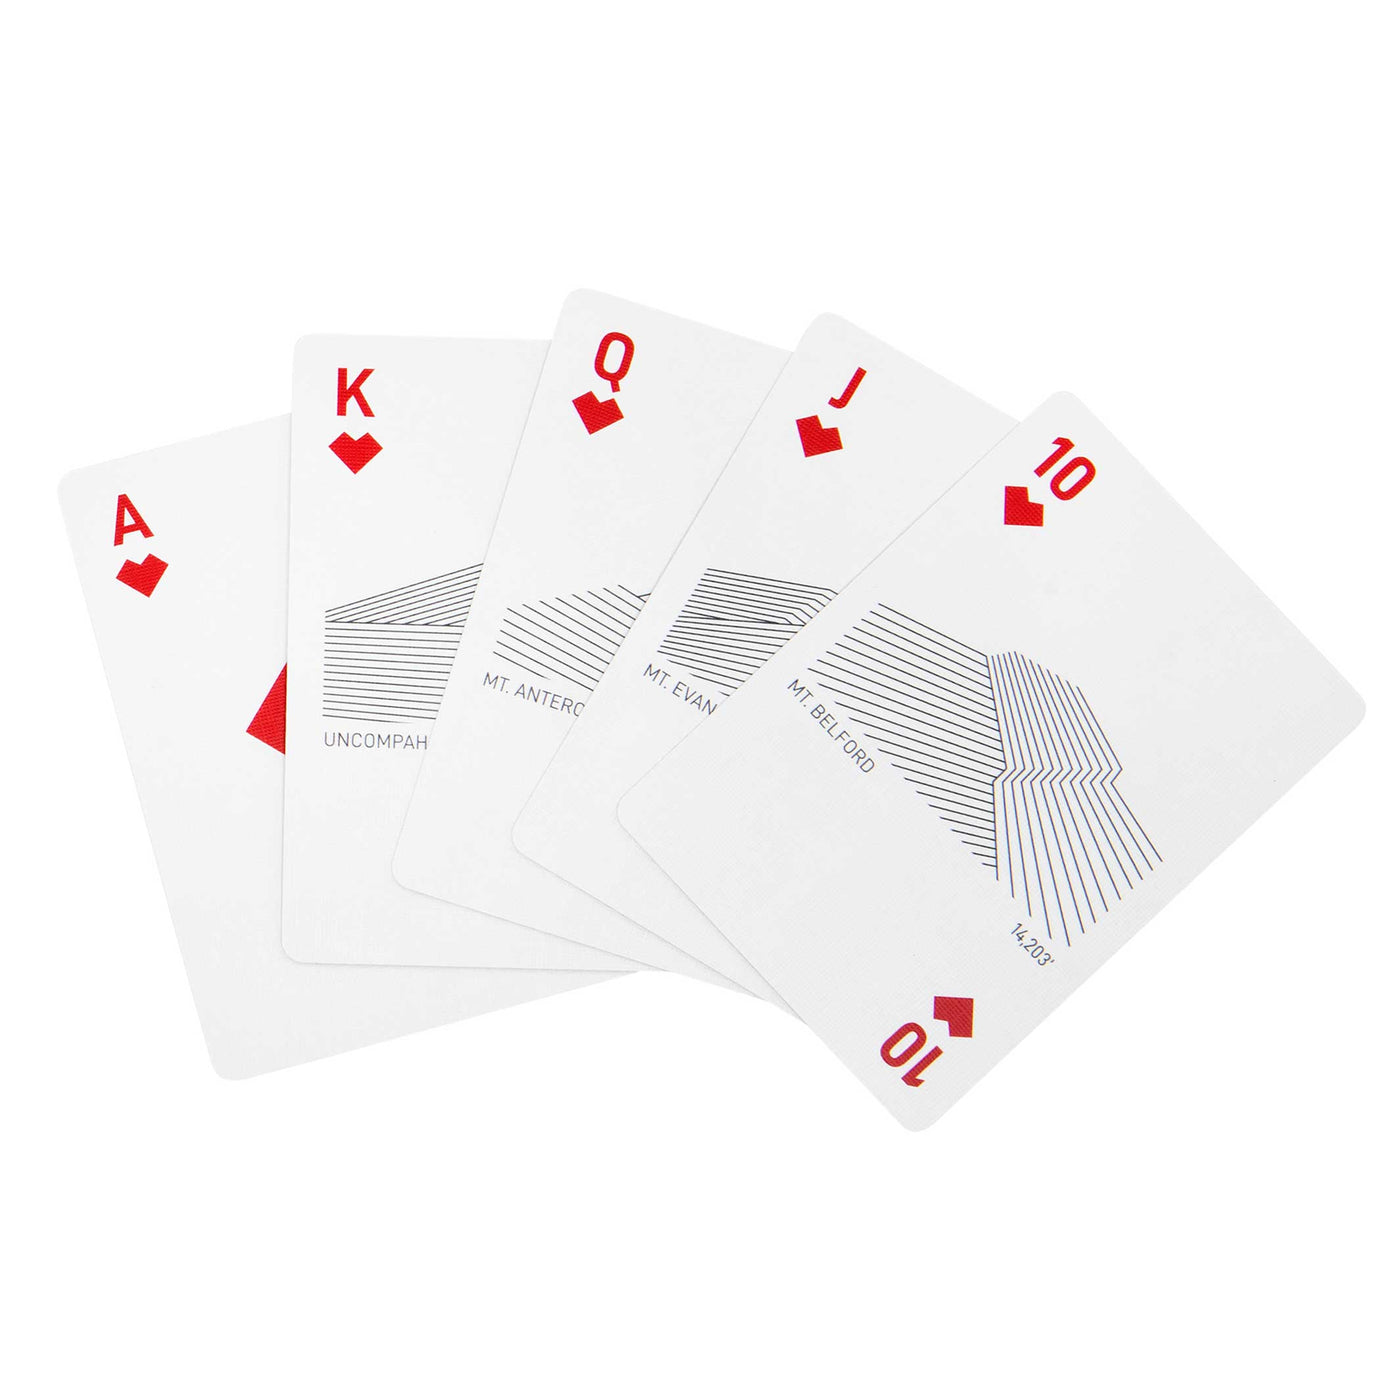 Royal Flush of Hearts Fanned out using Peak Playing Cards